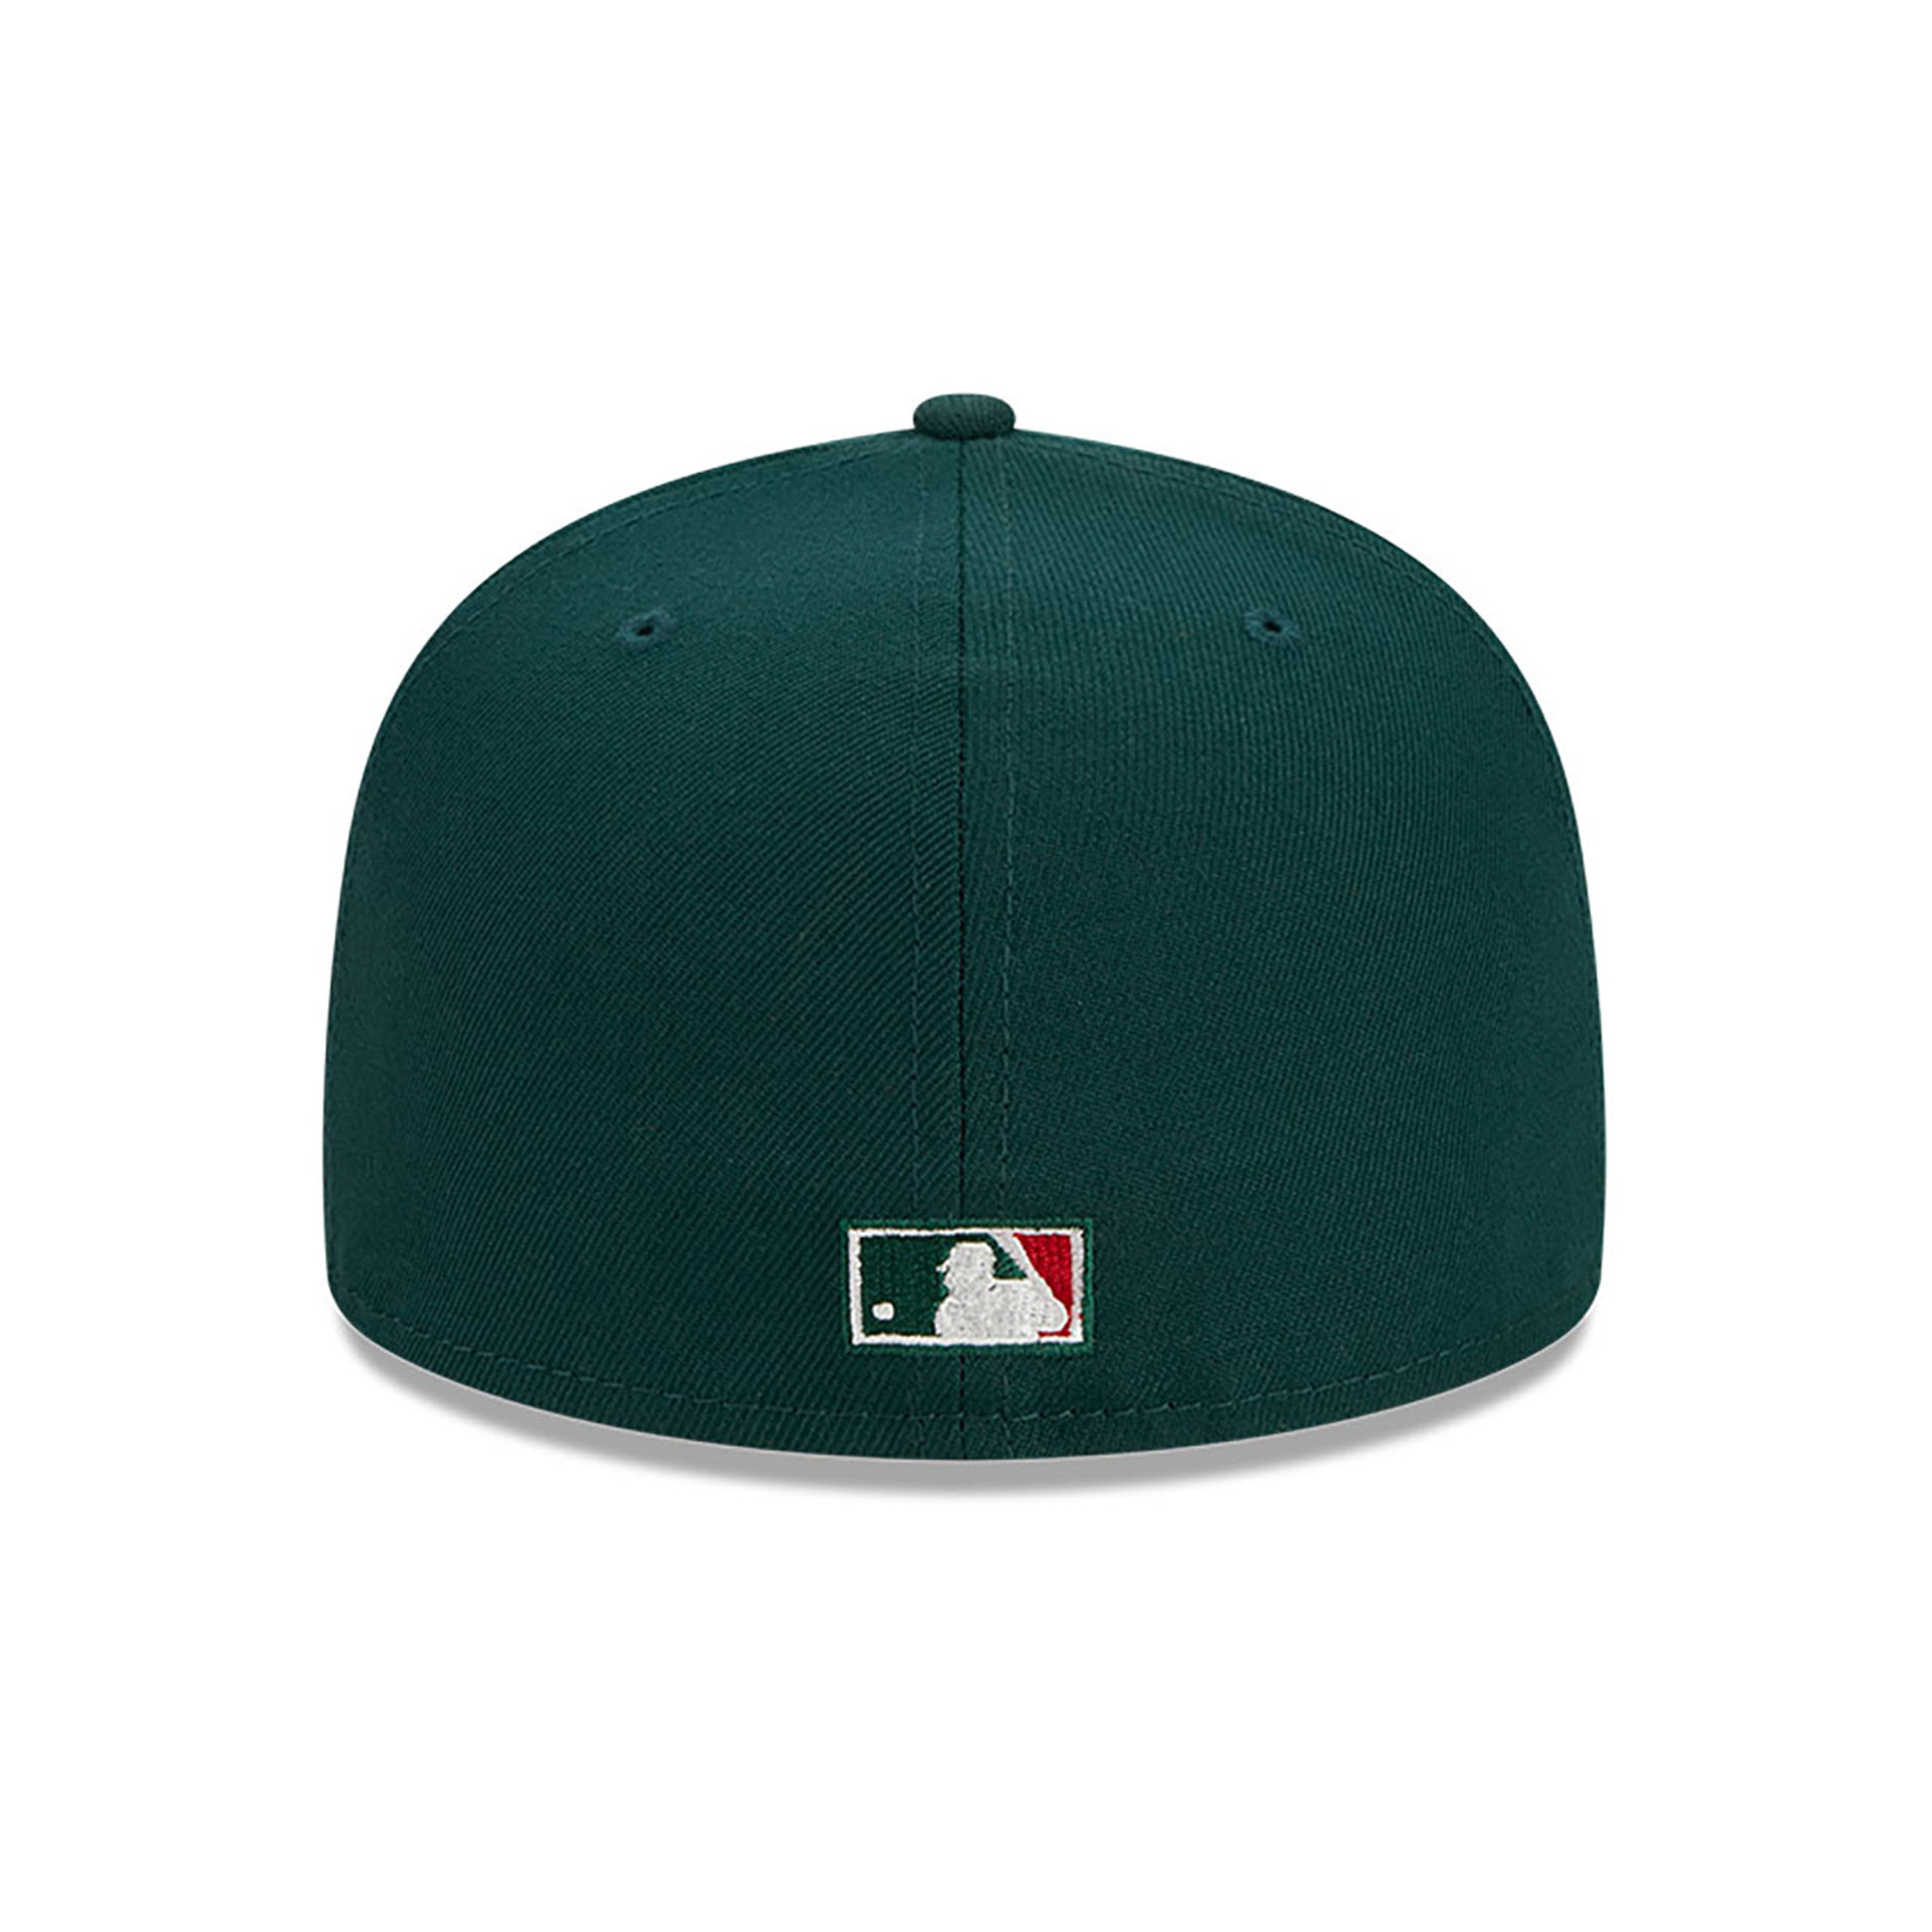 San Diego Padres Spice Berry Dark Green 59FIFTY Fitted Cap